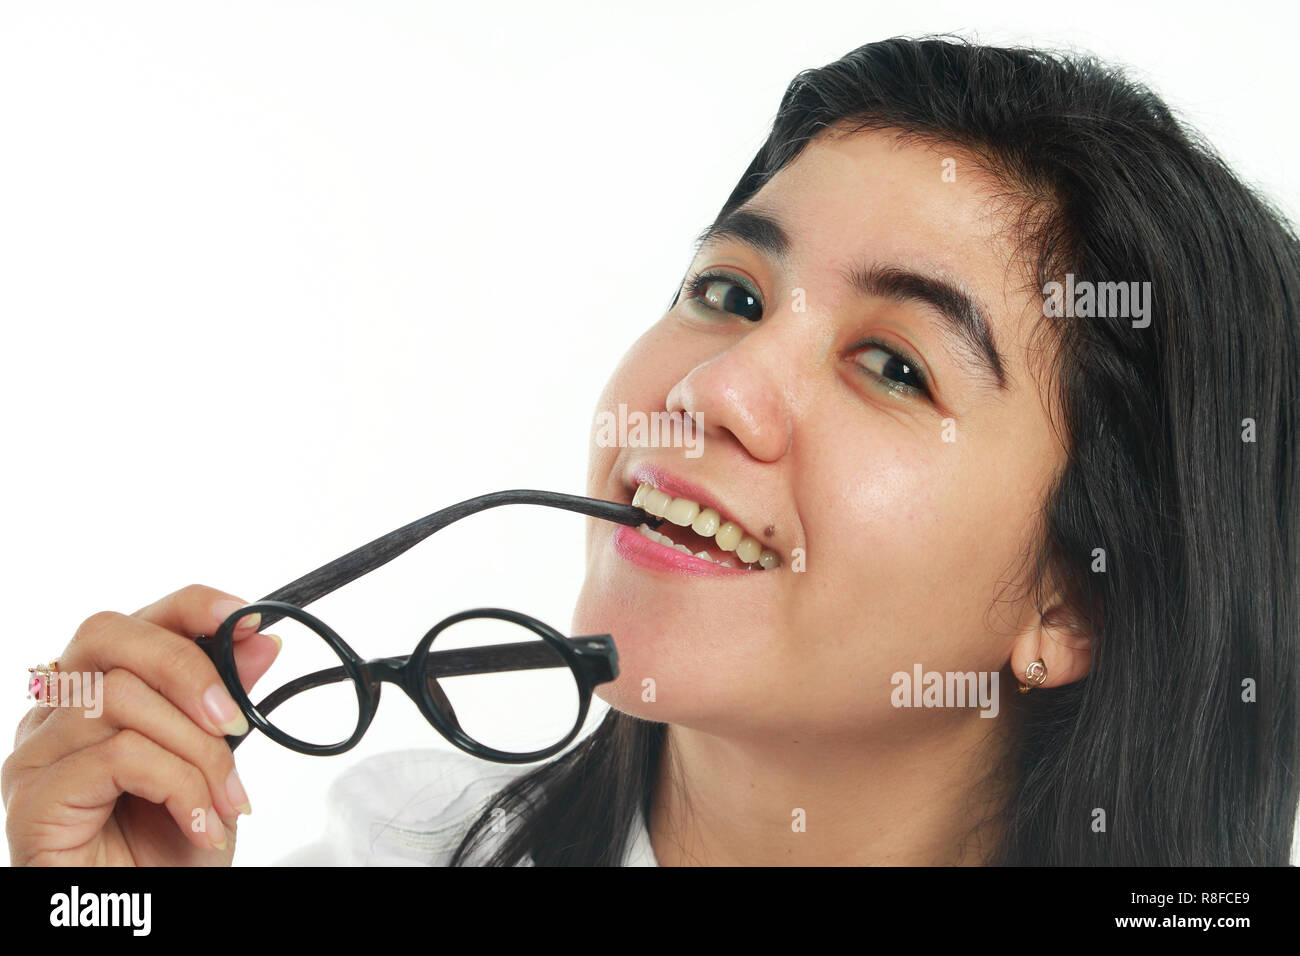 Photo image portrait of a beautiful cute young Asian woman with mole looked very happy smiling, biting her eyeglasses, close up portrait over white Stock Photo